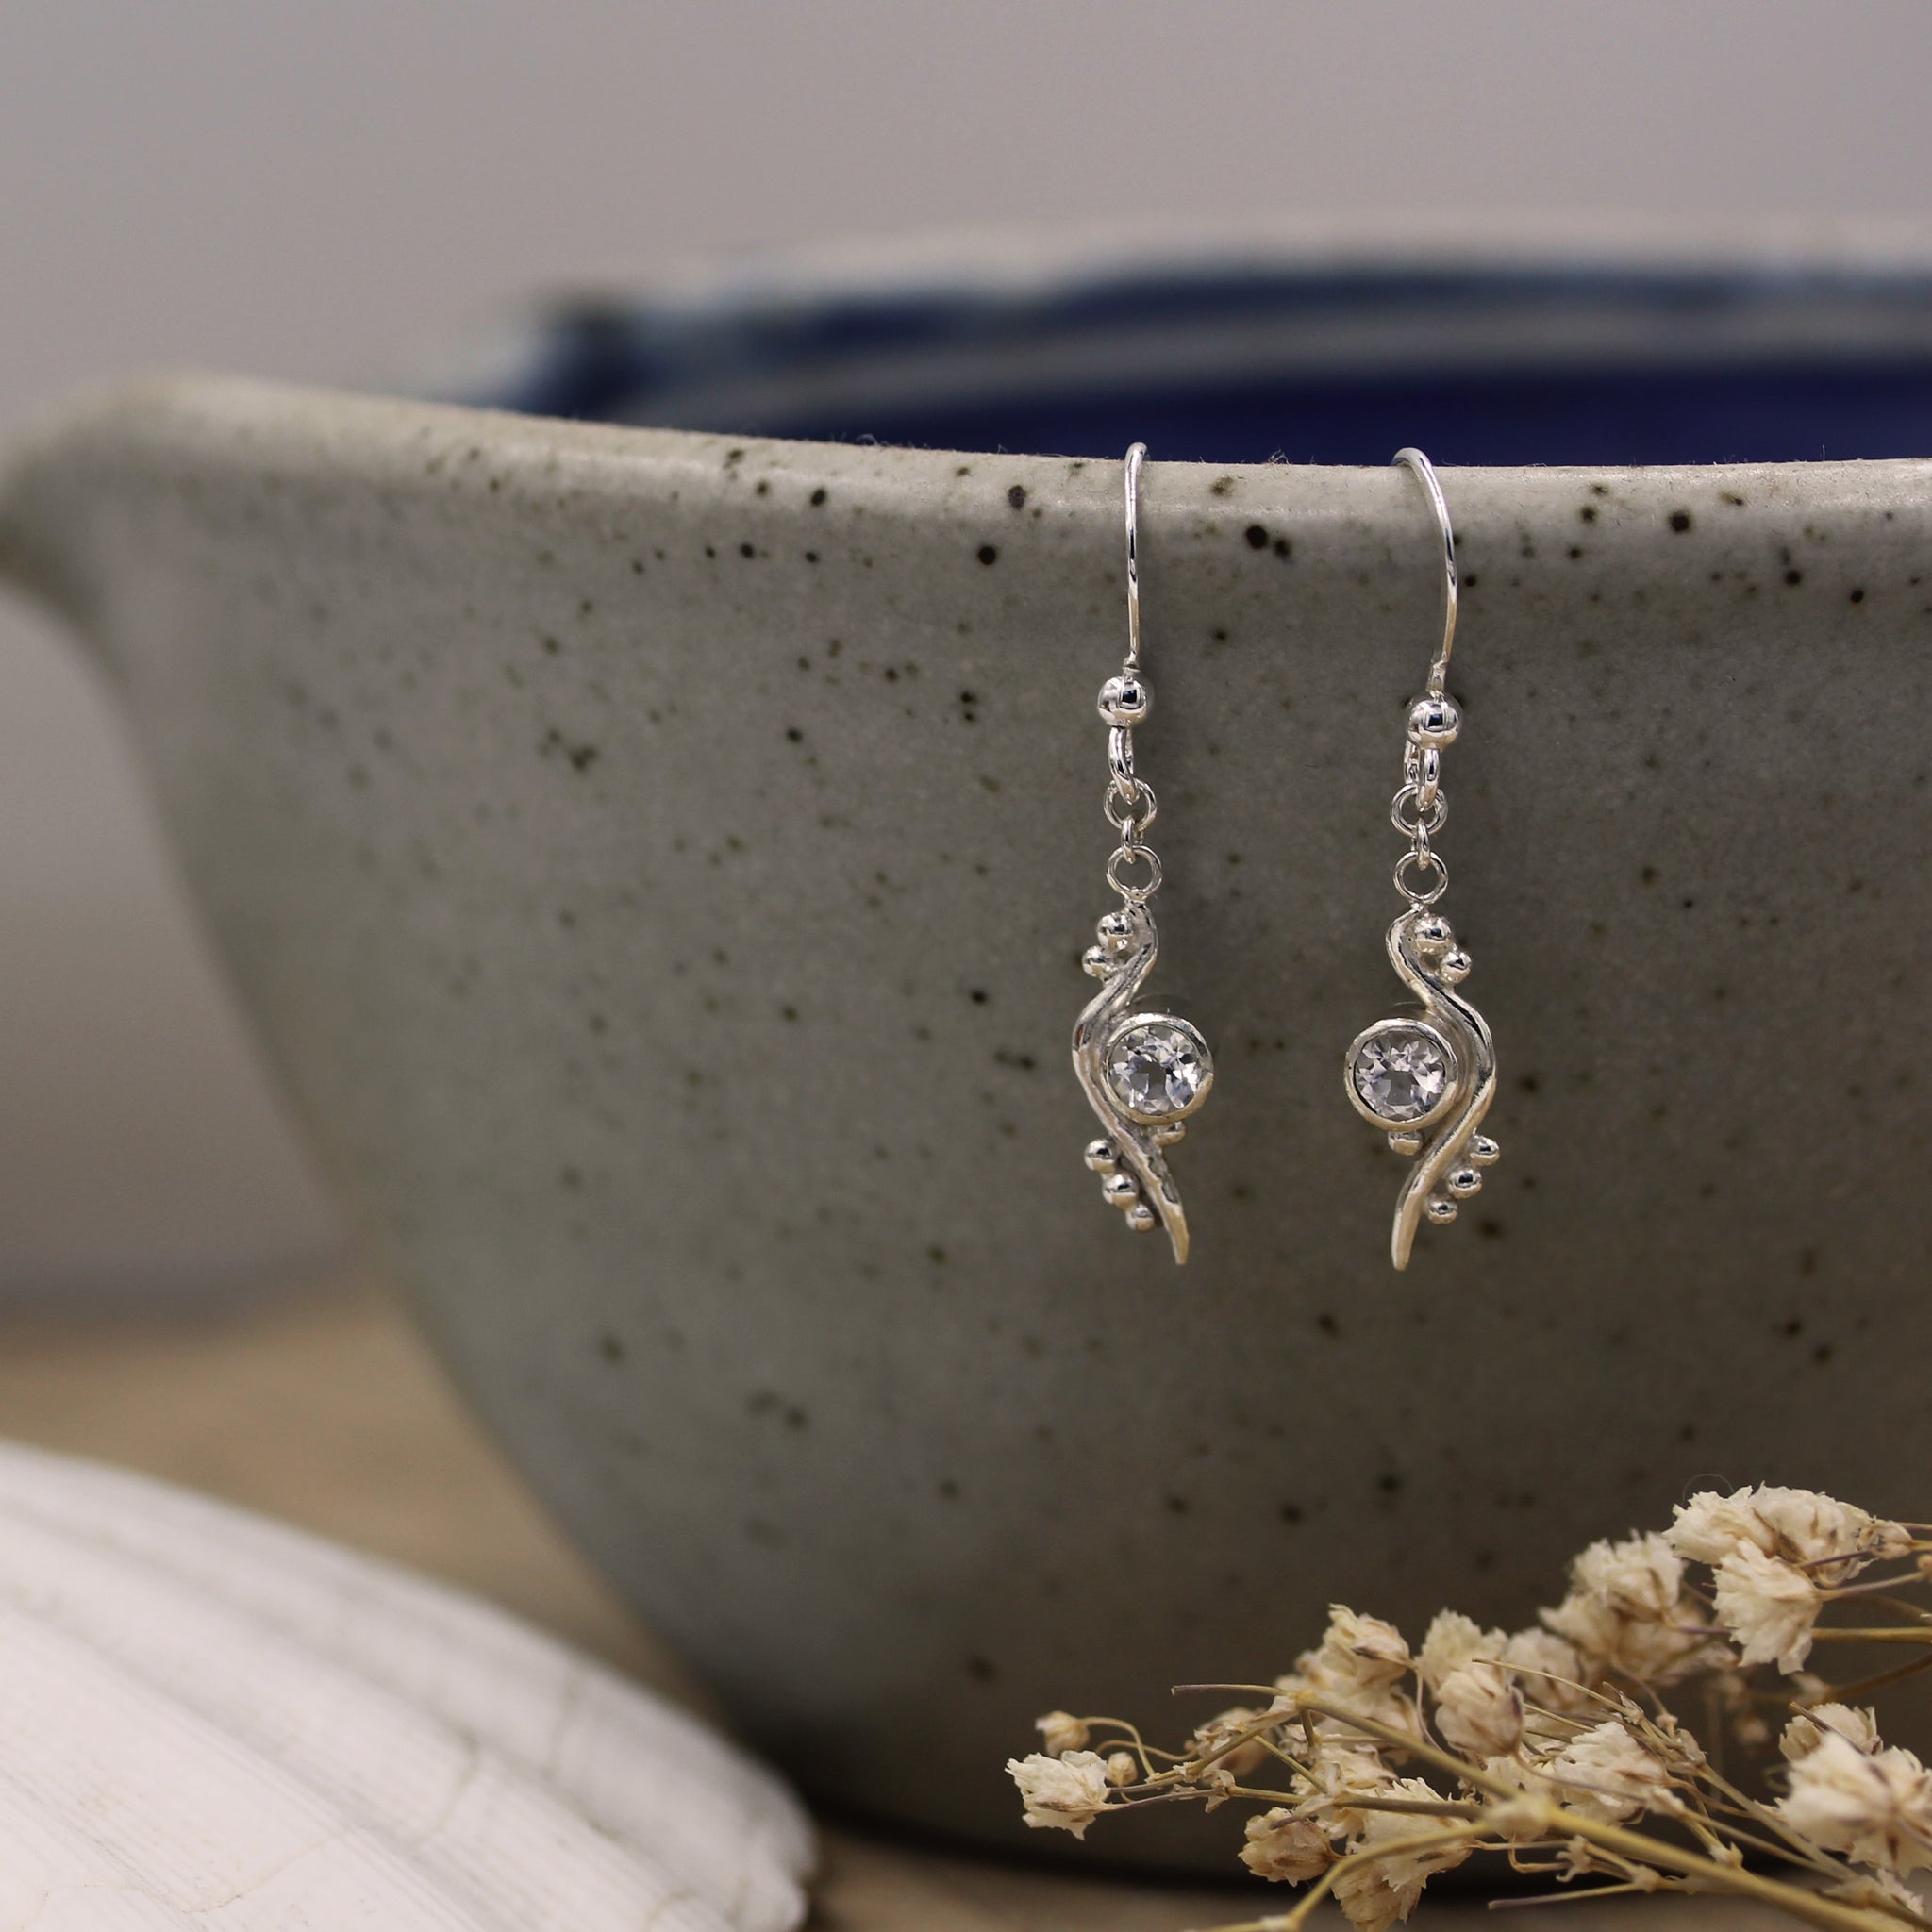 Sea inspired drop earrings handmade in recycled silver and white topaz